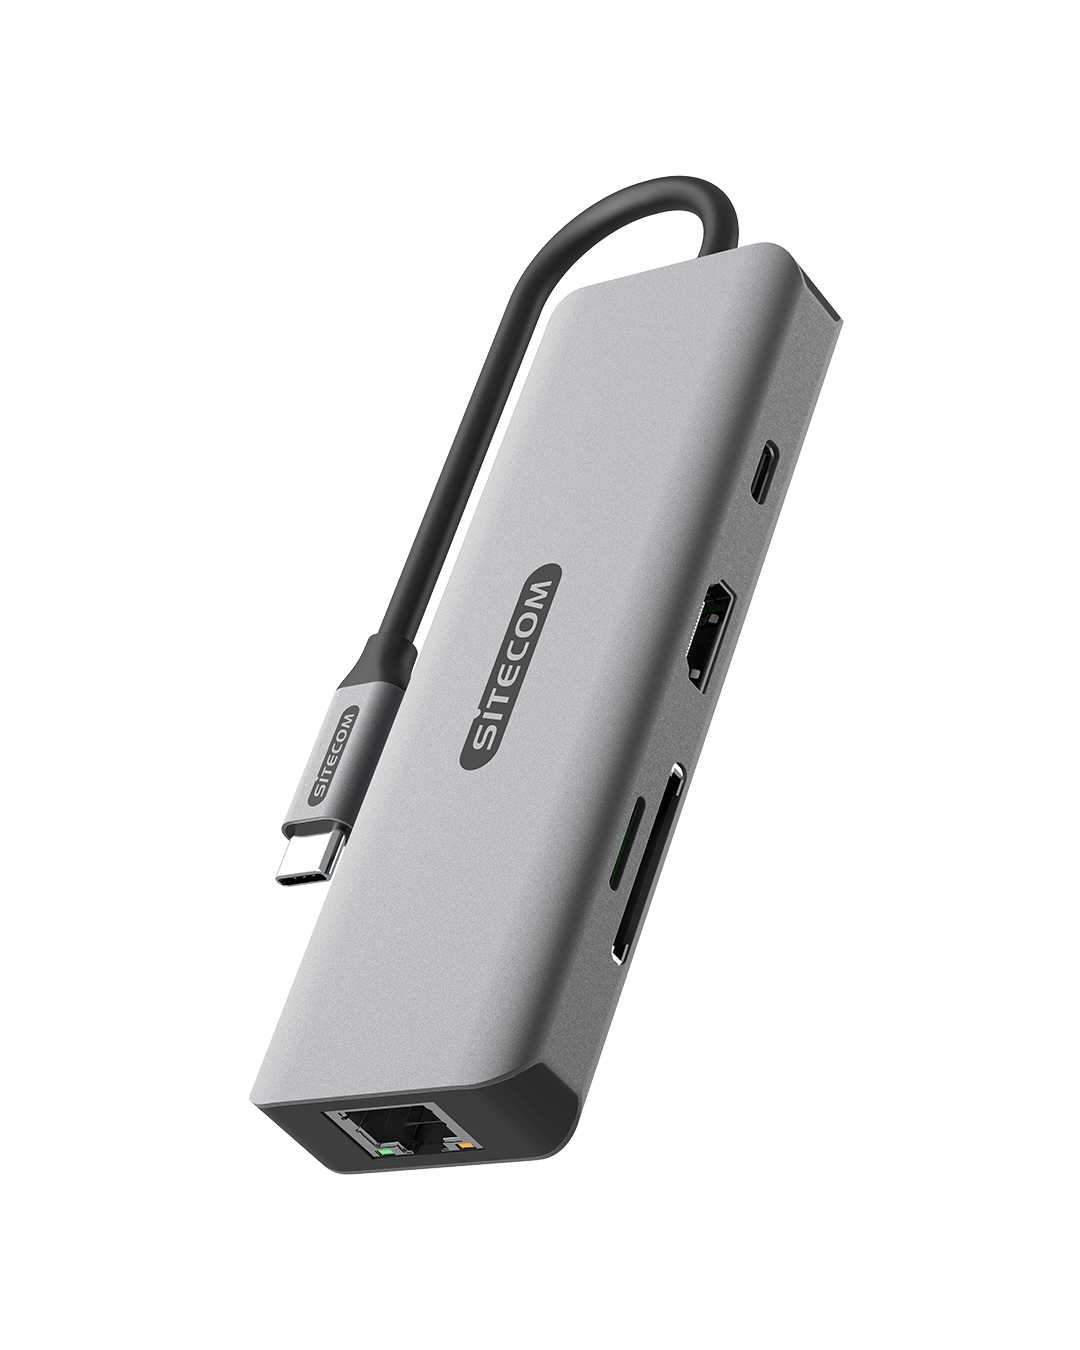 Sitecom - 8 in 1 USB-C Power Delivery Multiport Adapter - CN-5507